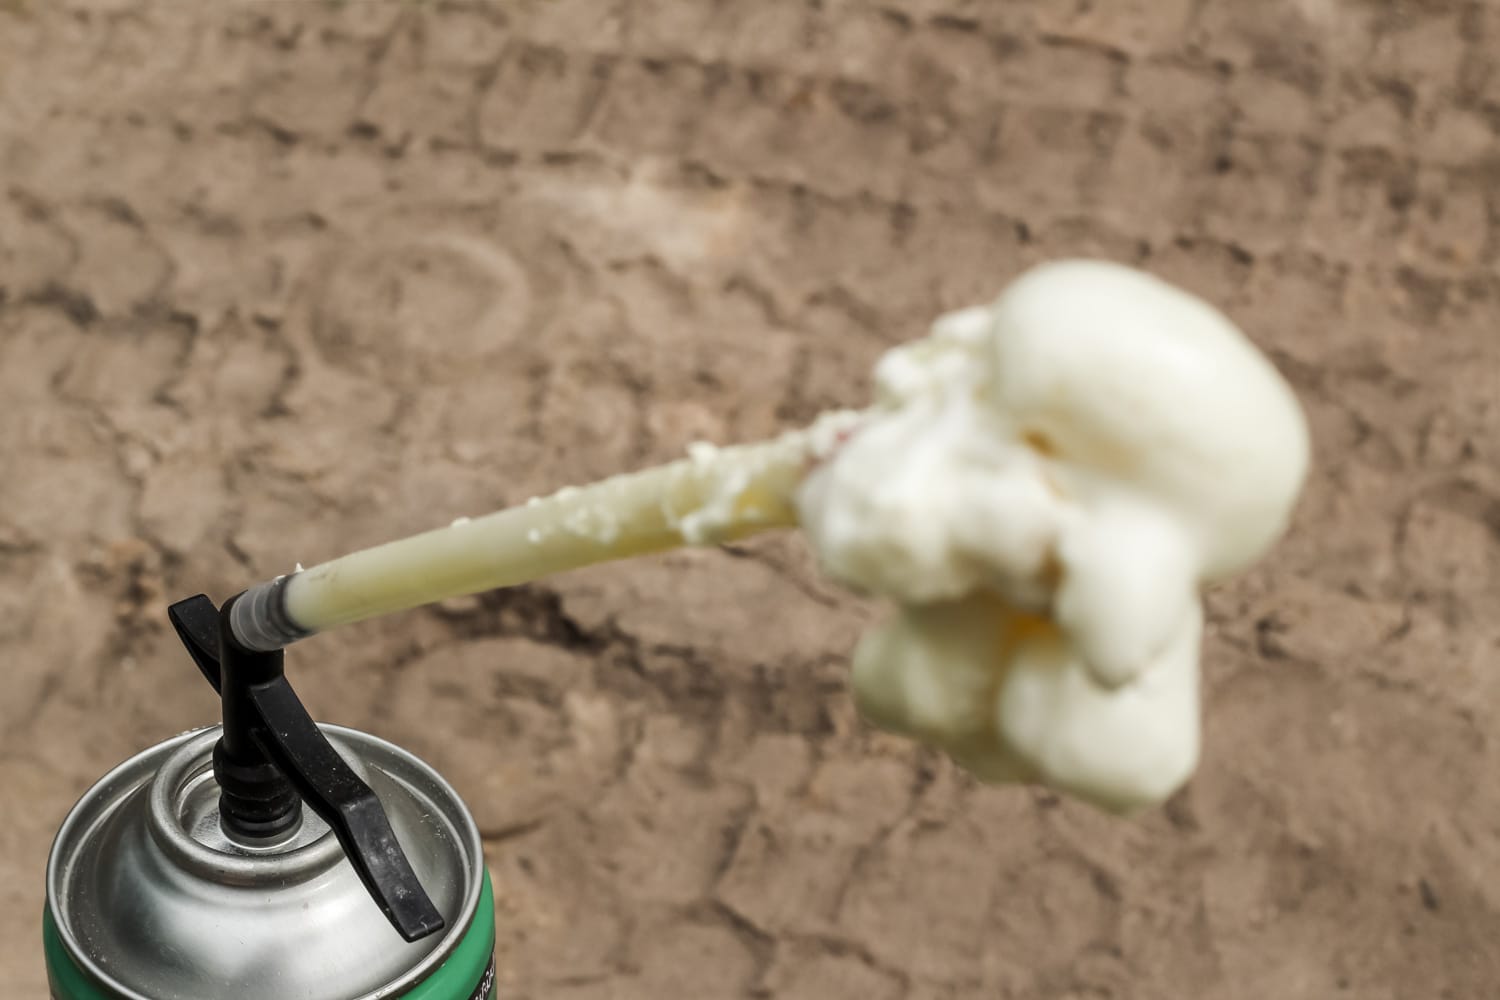 How To Clean An Expanding Foam Nozzle For Reuse